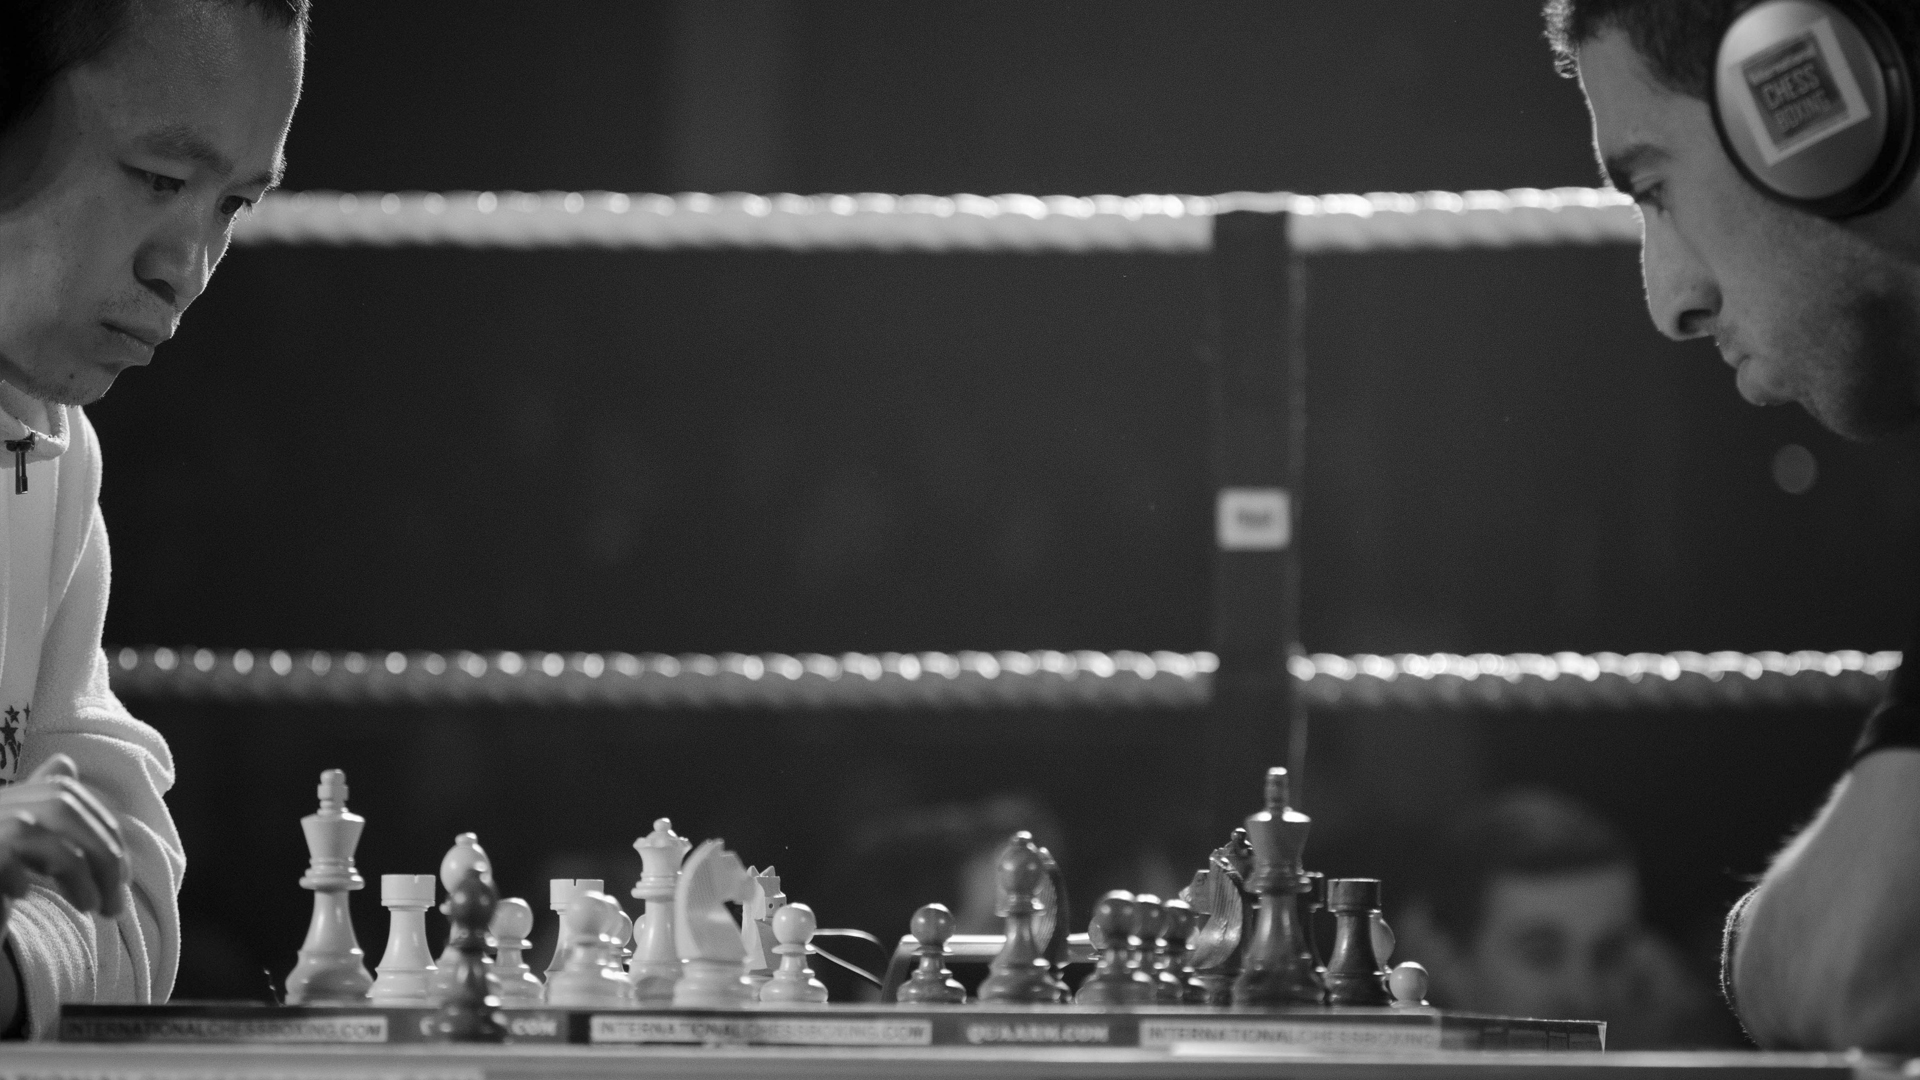 Chess boxing by Mac Colomb